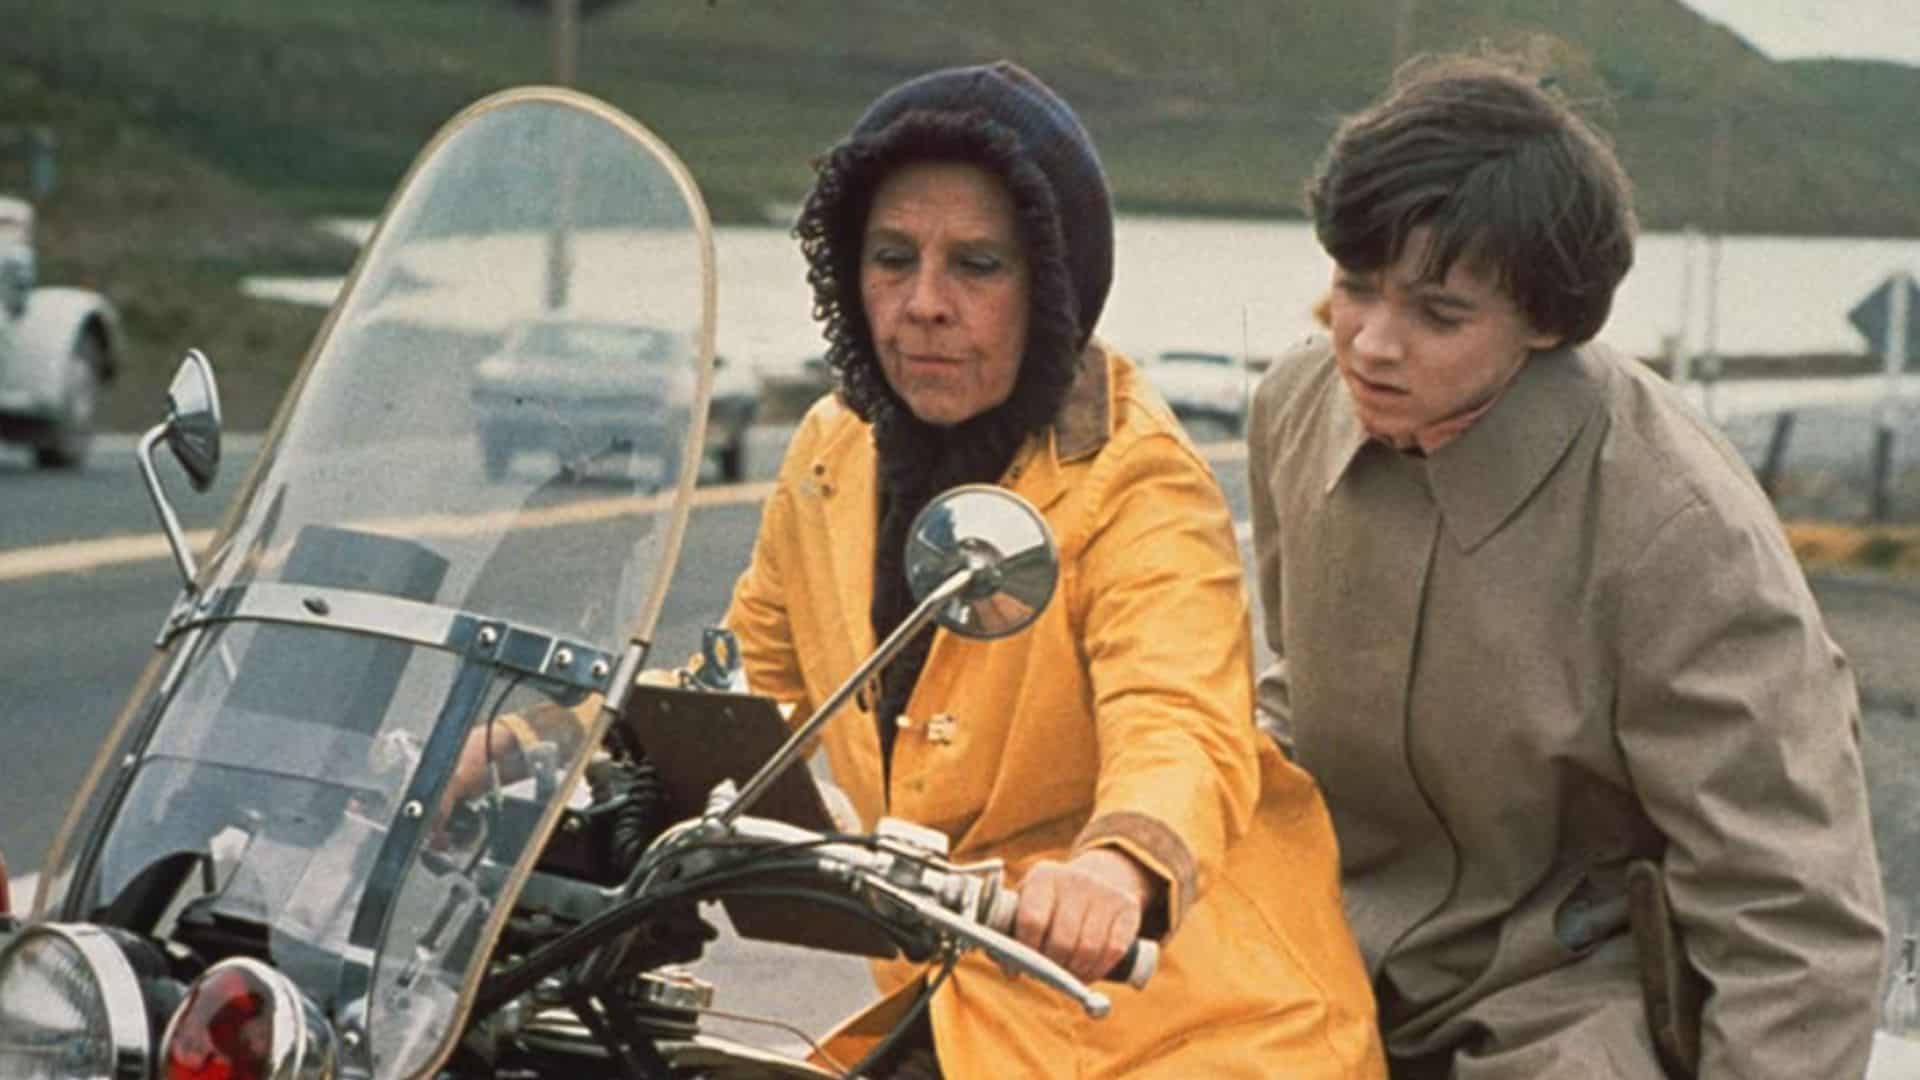 Harold and Maude sitting on a motorcycle